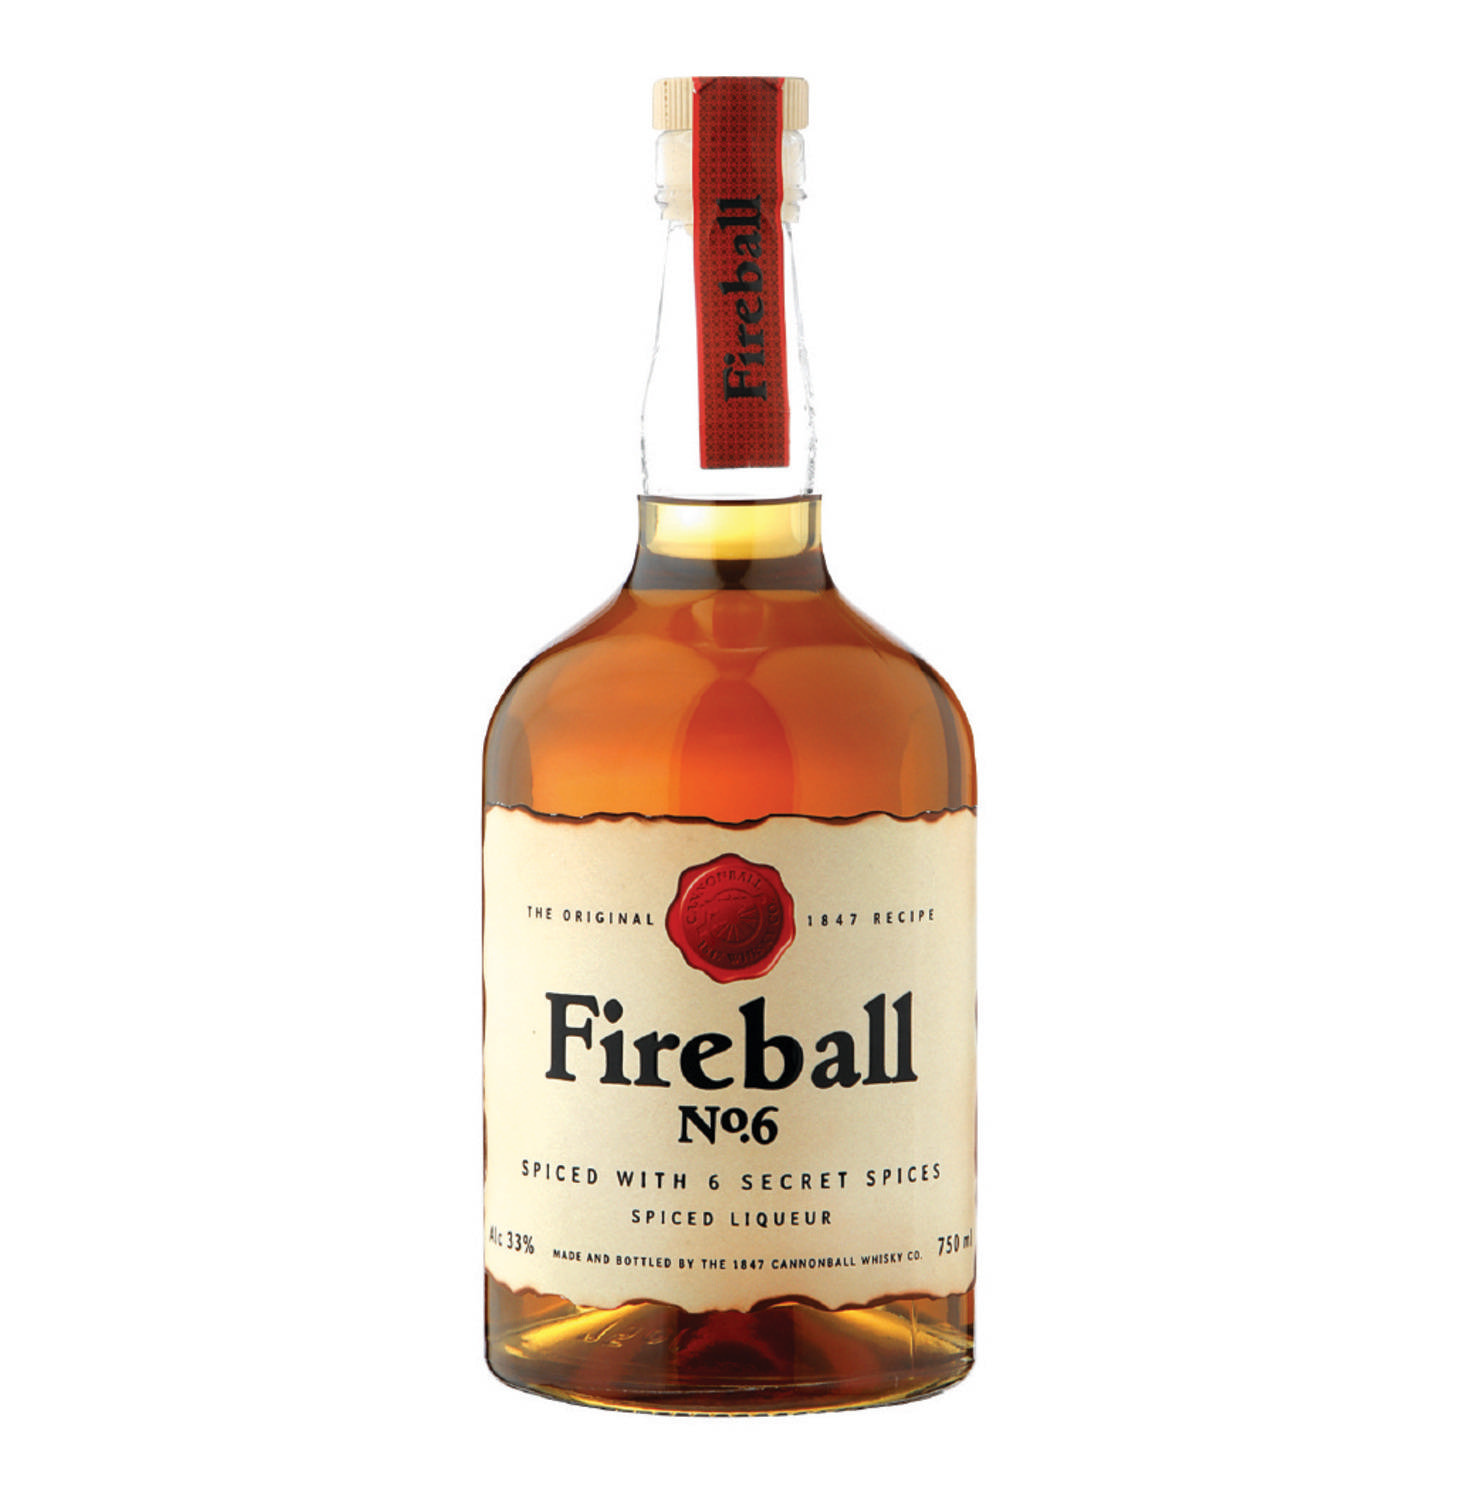 FIREBALL NO.6 Whisky (1 x 750ml) - Lowest Prices & Specials Online ...